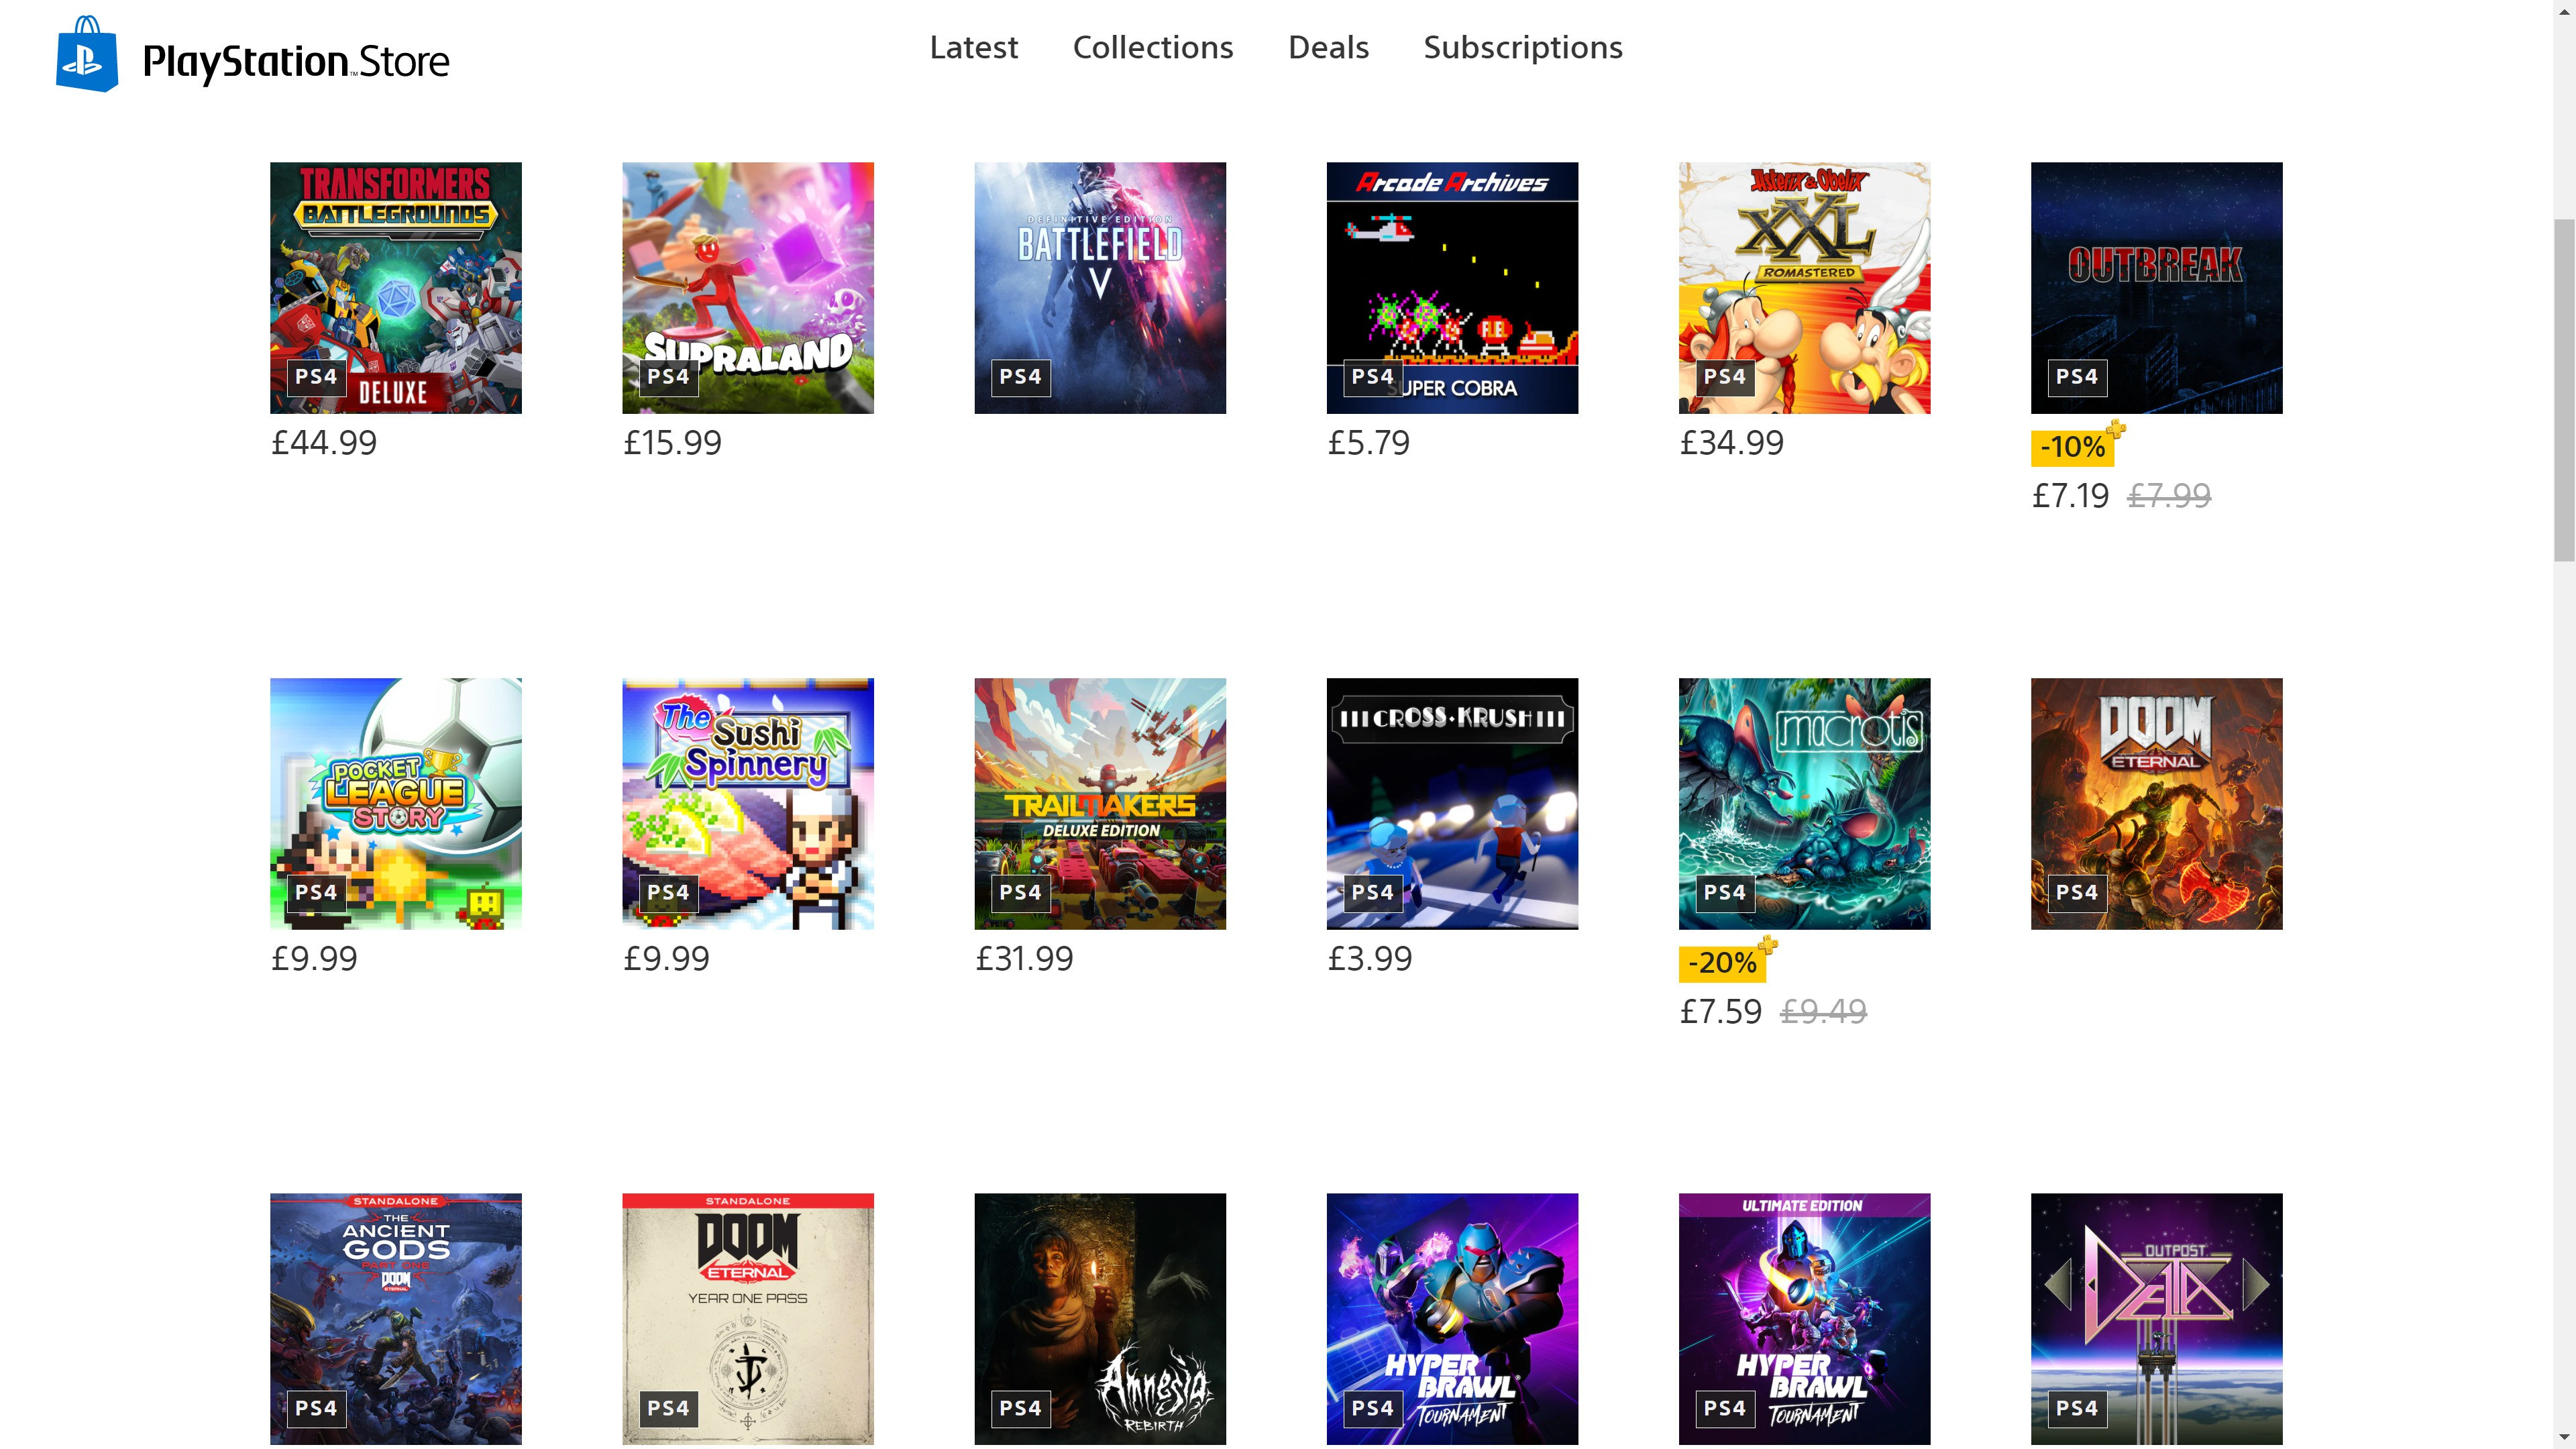 ps1 games on ps4 store